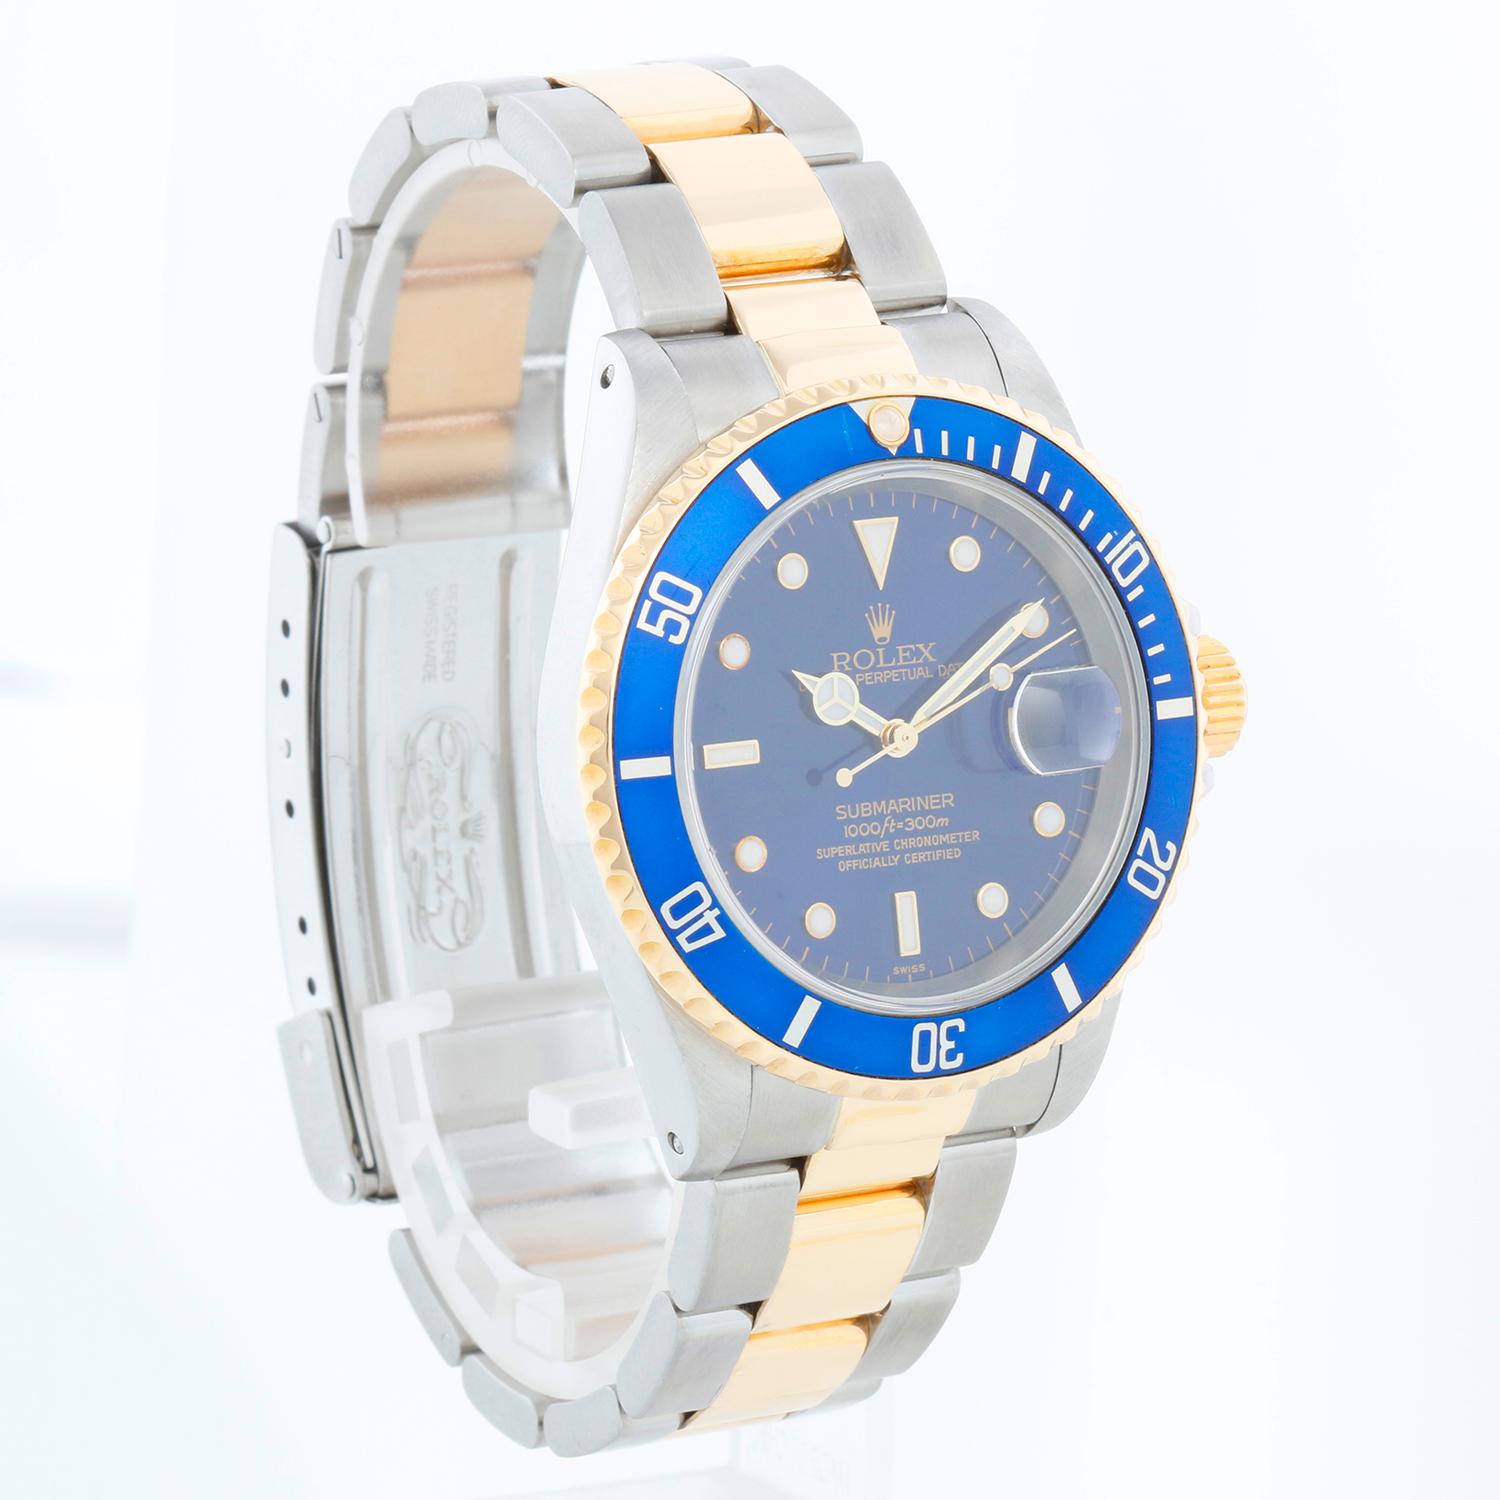 Rolex Submariner 2-Tone Steel & Gold Men's Watch 16613 In Excellent Condition For Sale In Dallas, TX